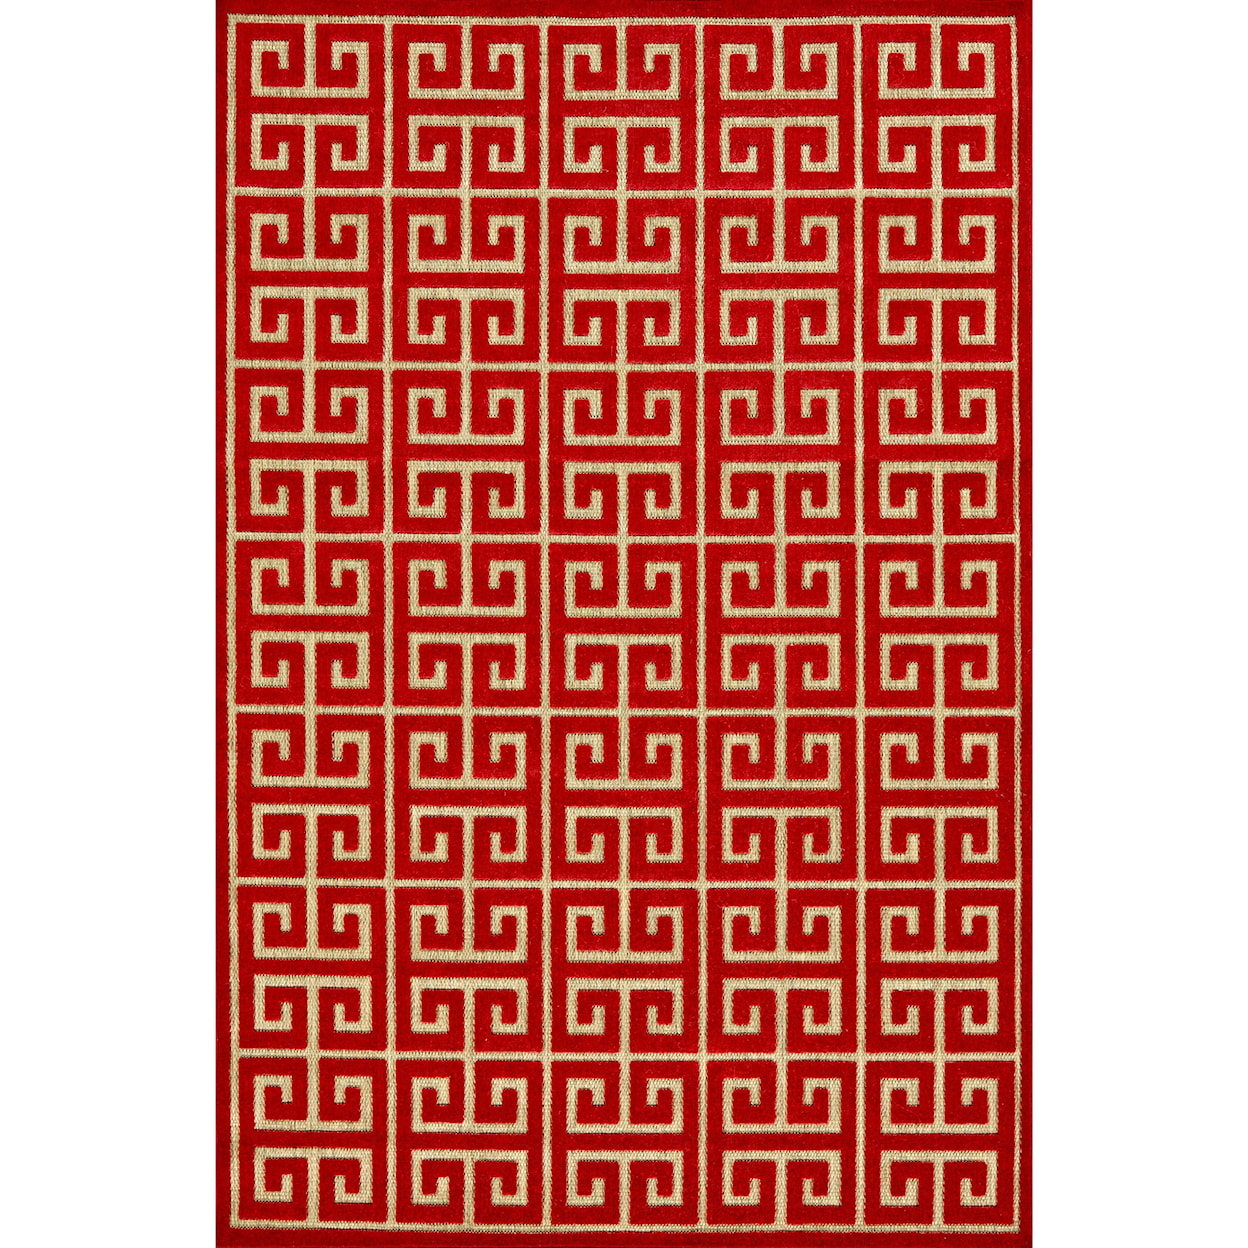 Feizy Rugs Raphia I Tan/Red 2'-1" X 4' Area Rug